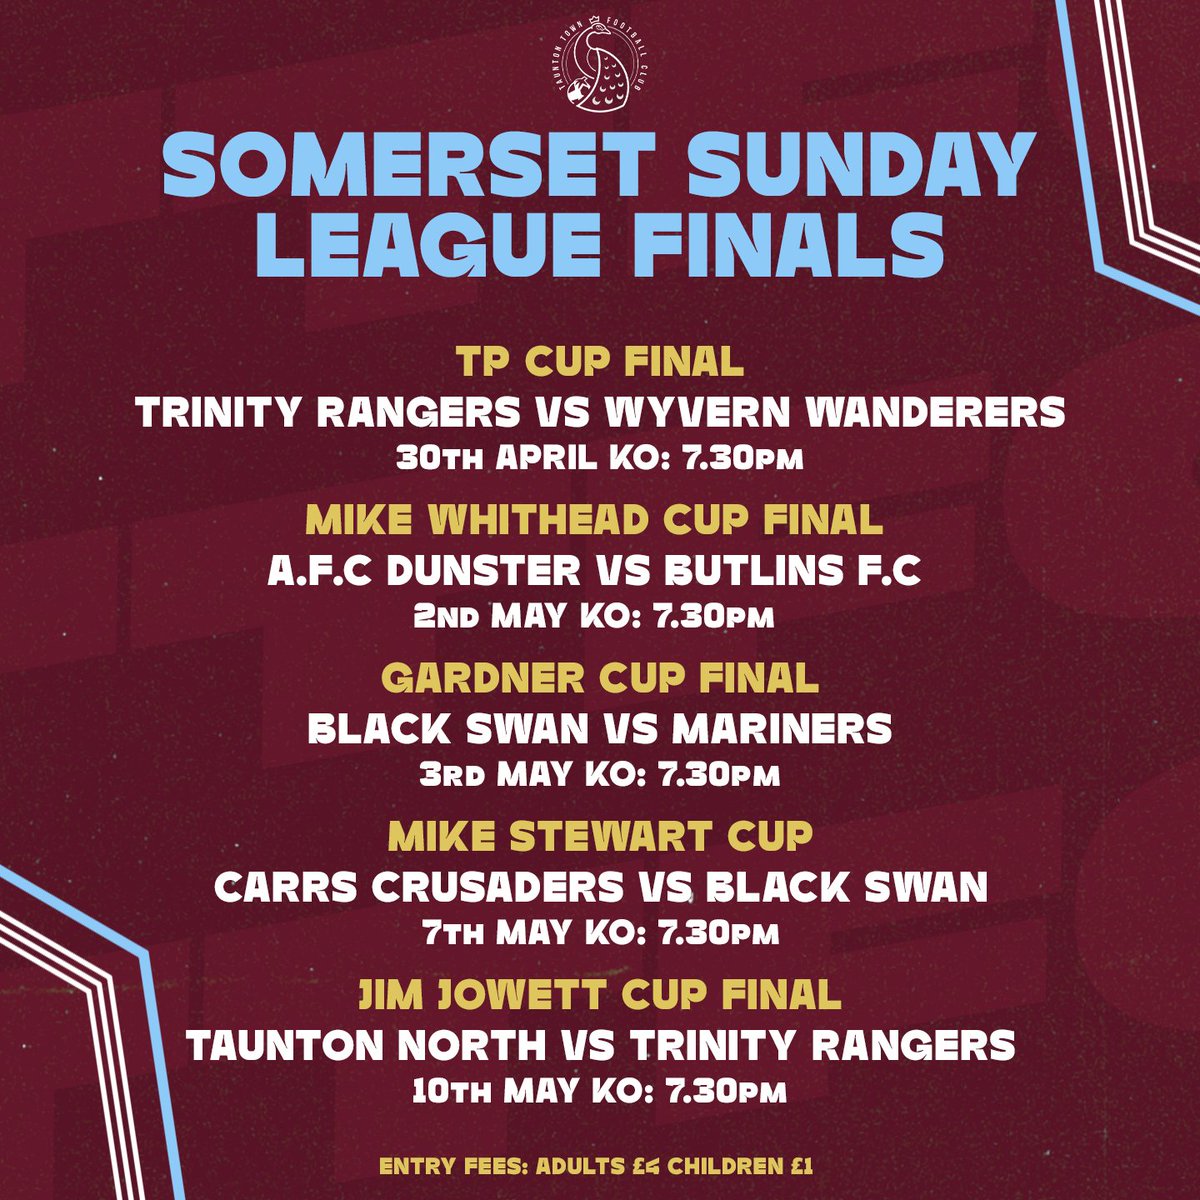 Wordsworth Drive will play host to the Somerset Sunday League Cup Finals over the coming month.

More details below 👇

#UpThePeacocks